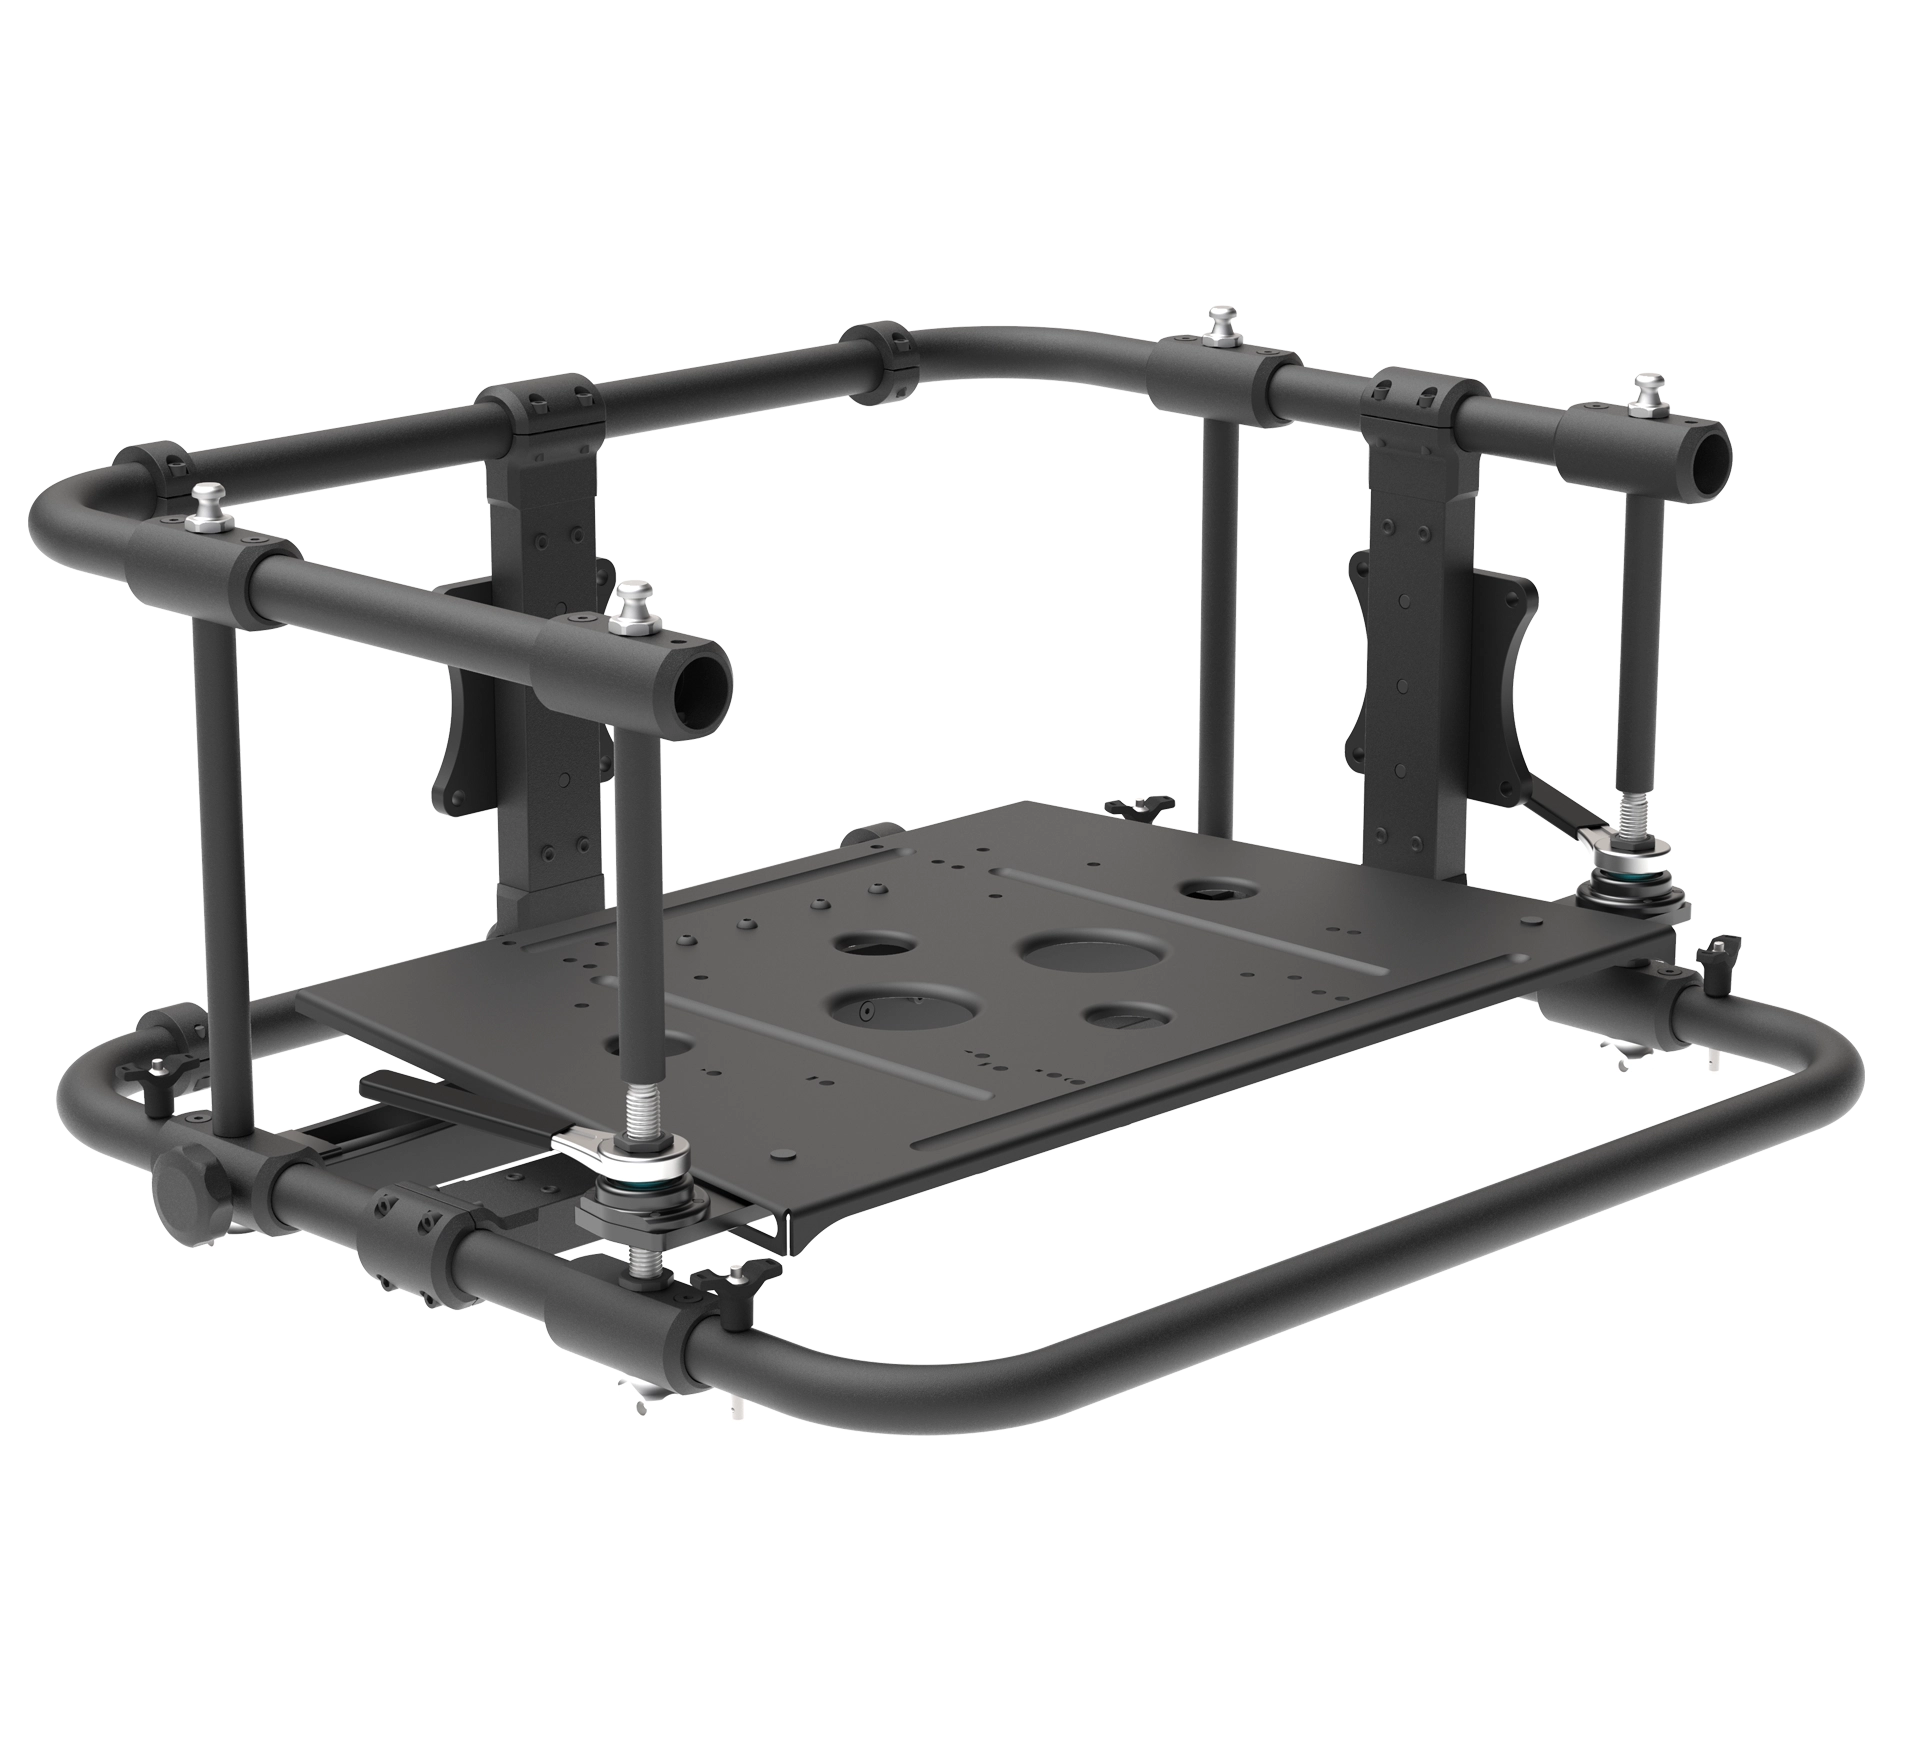 Rigtec Air Frame X30 Projector Rigging Frame